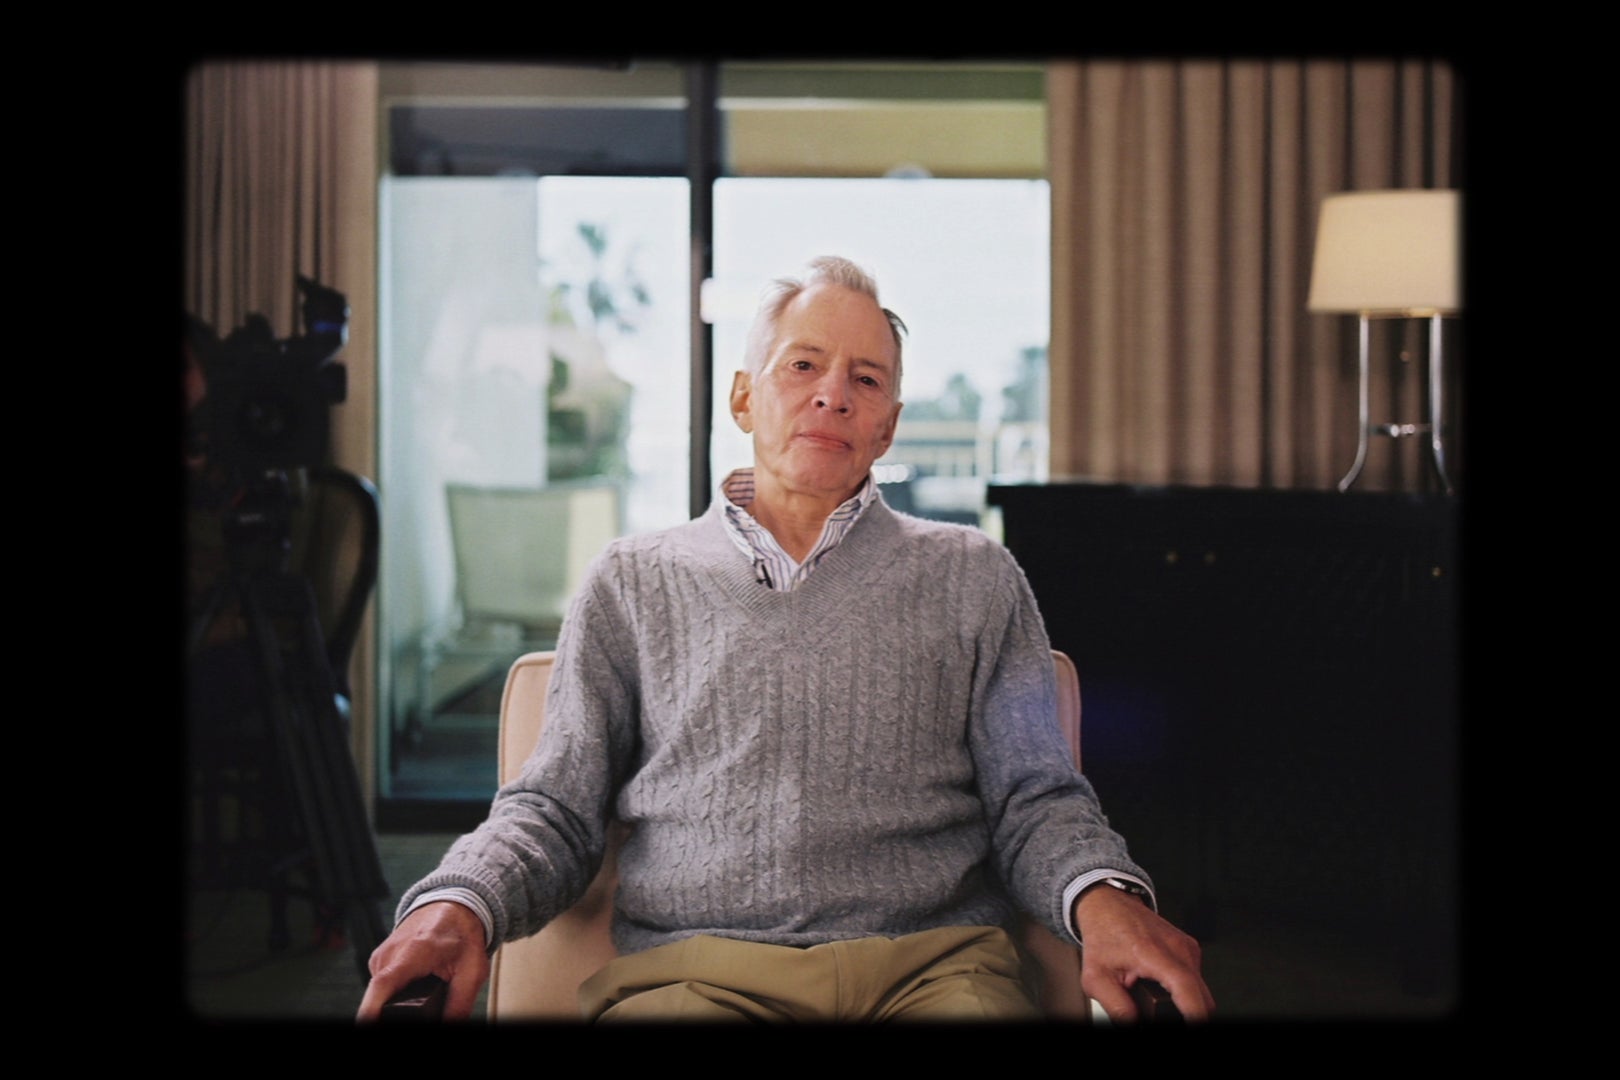 Robert Durst in ‘The Jinx - Part Two’